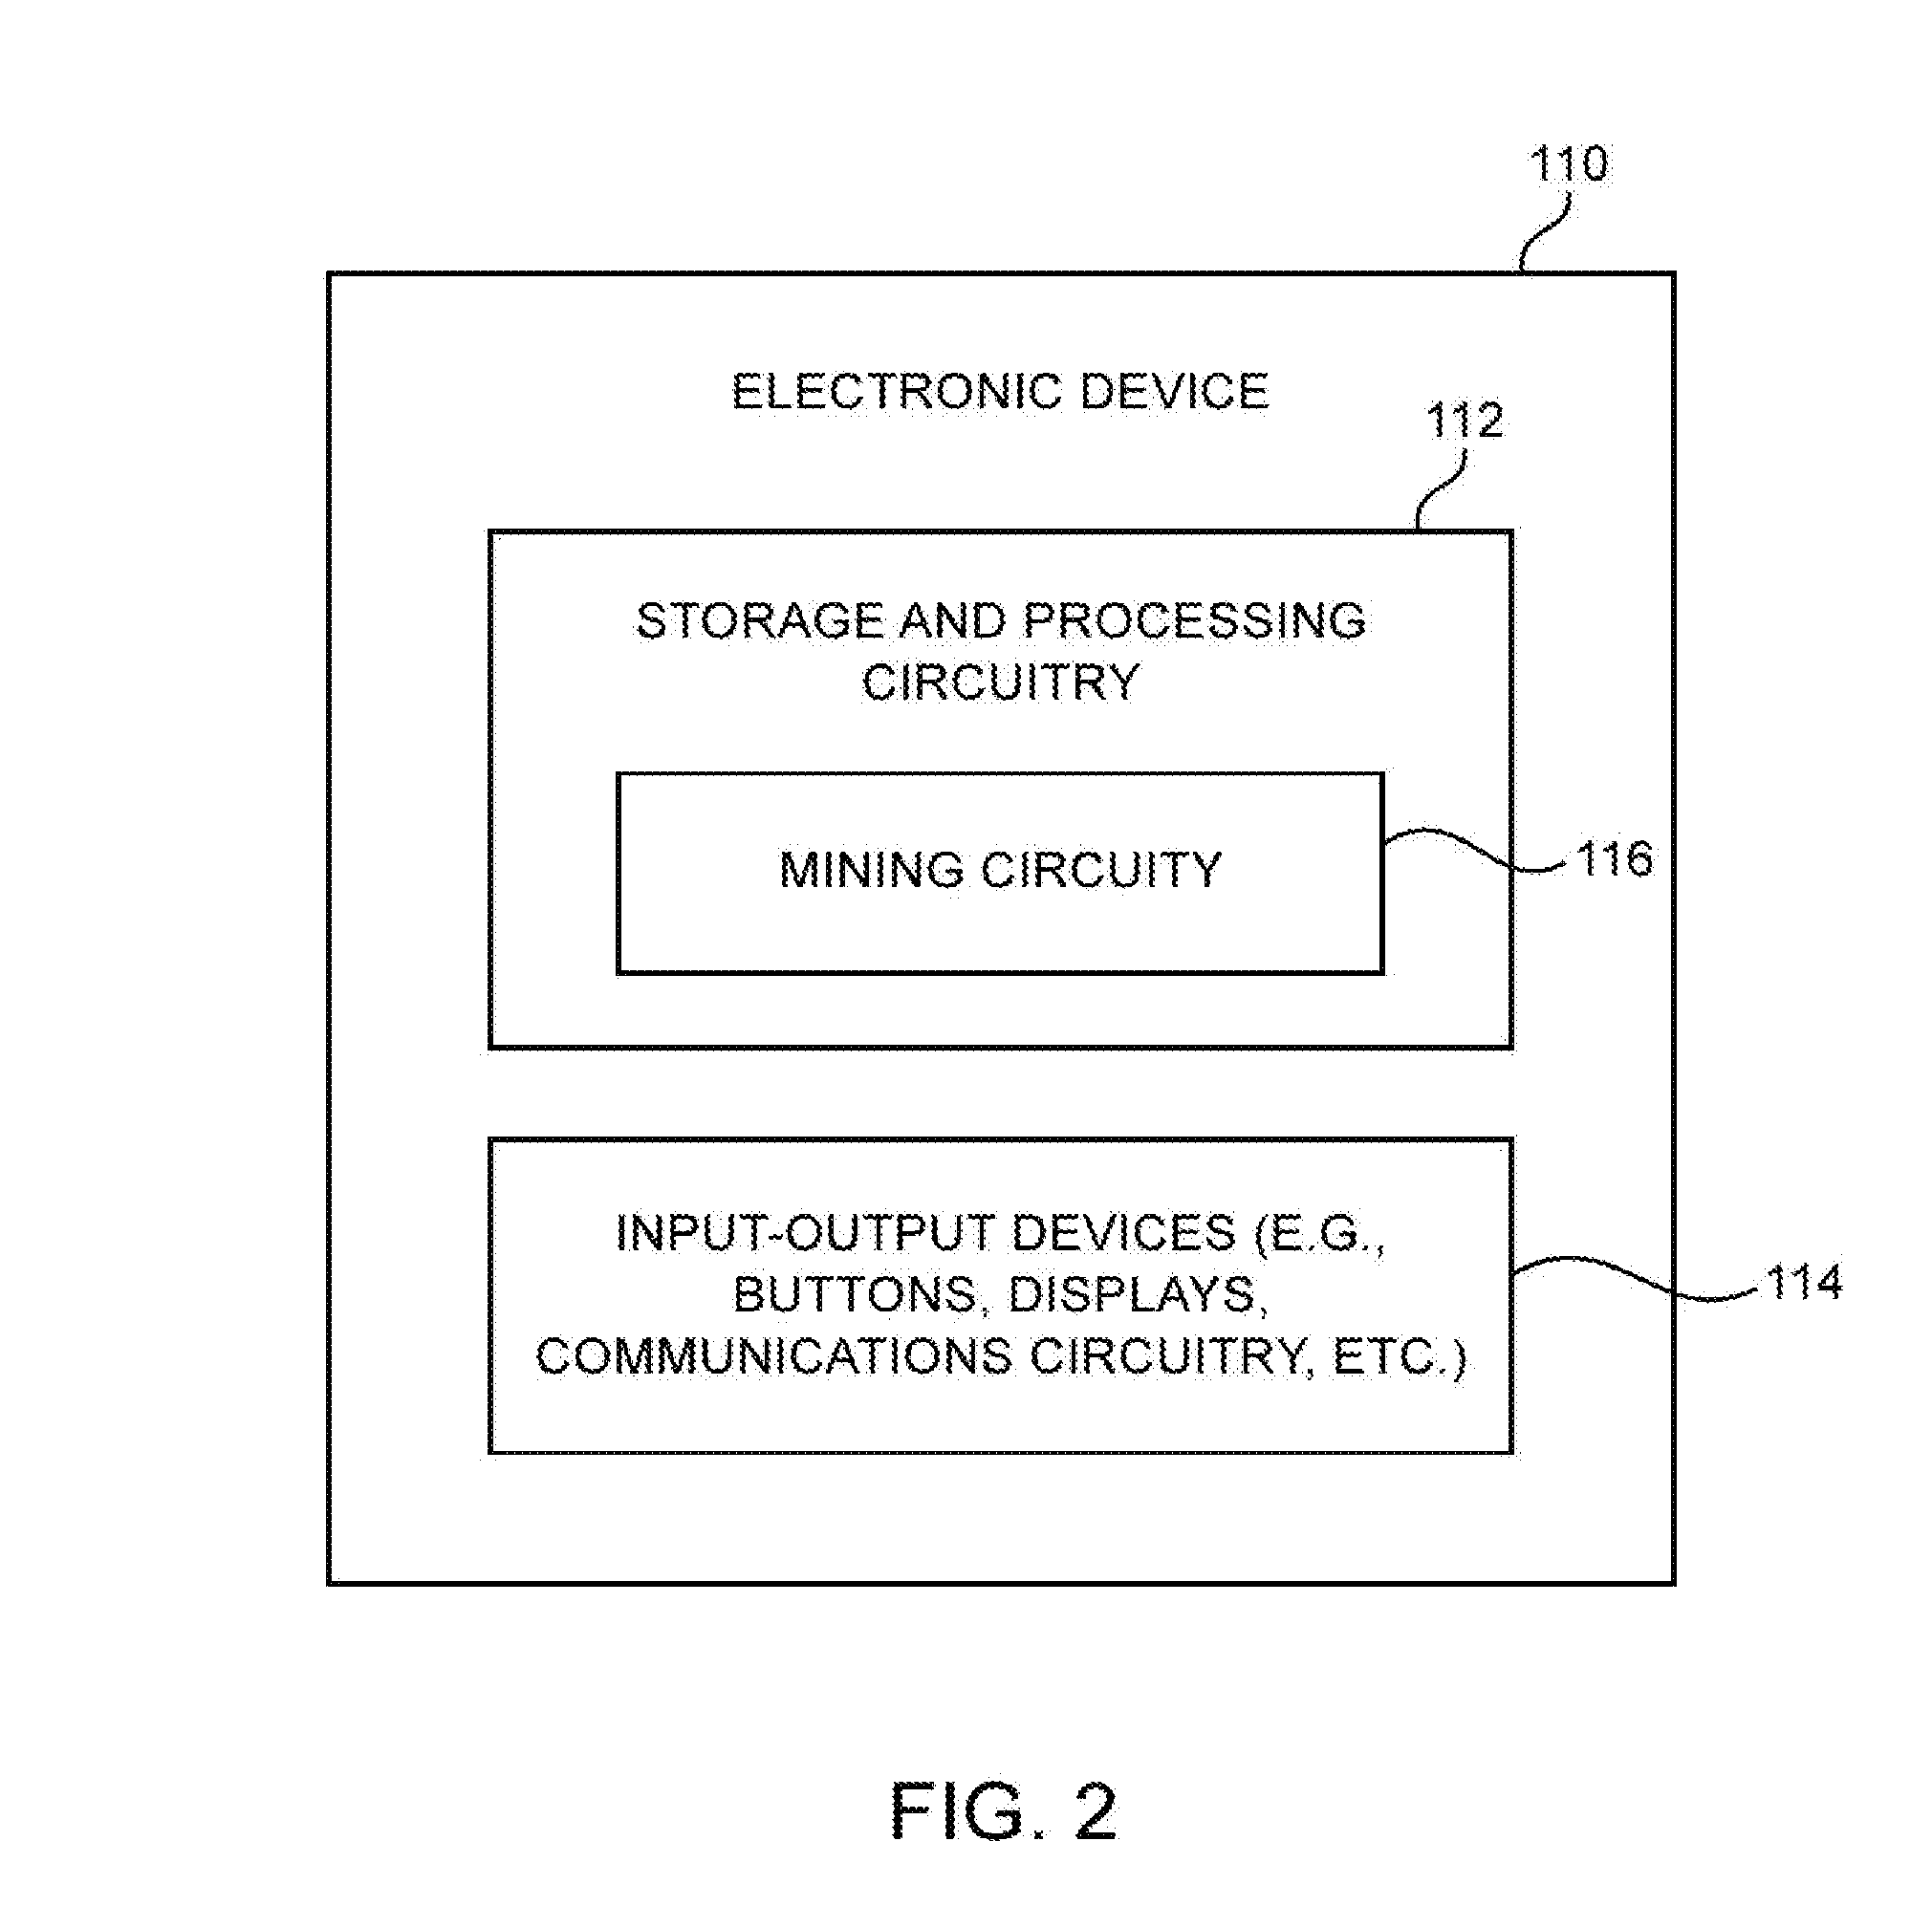 Digital currency mining circuitry having shared processing logic